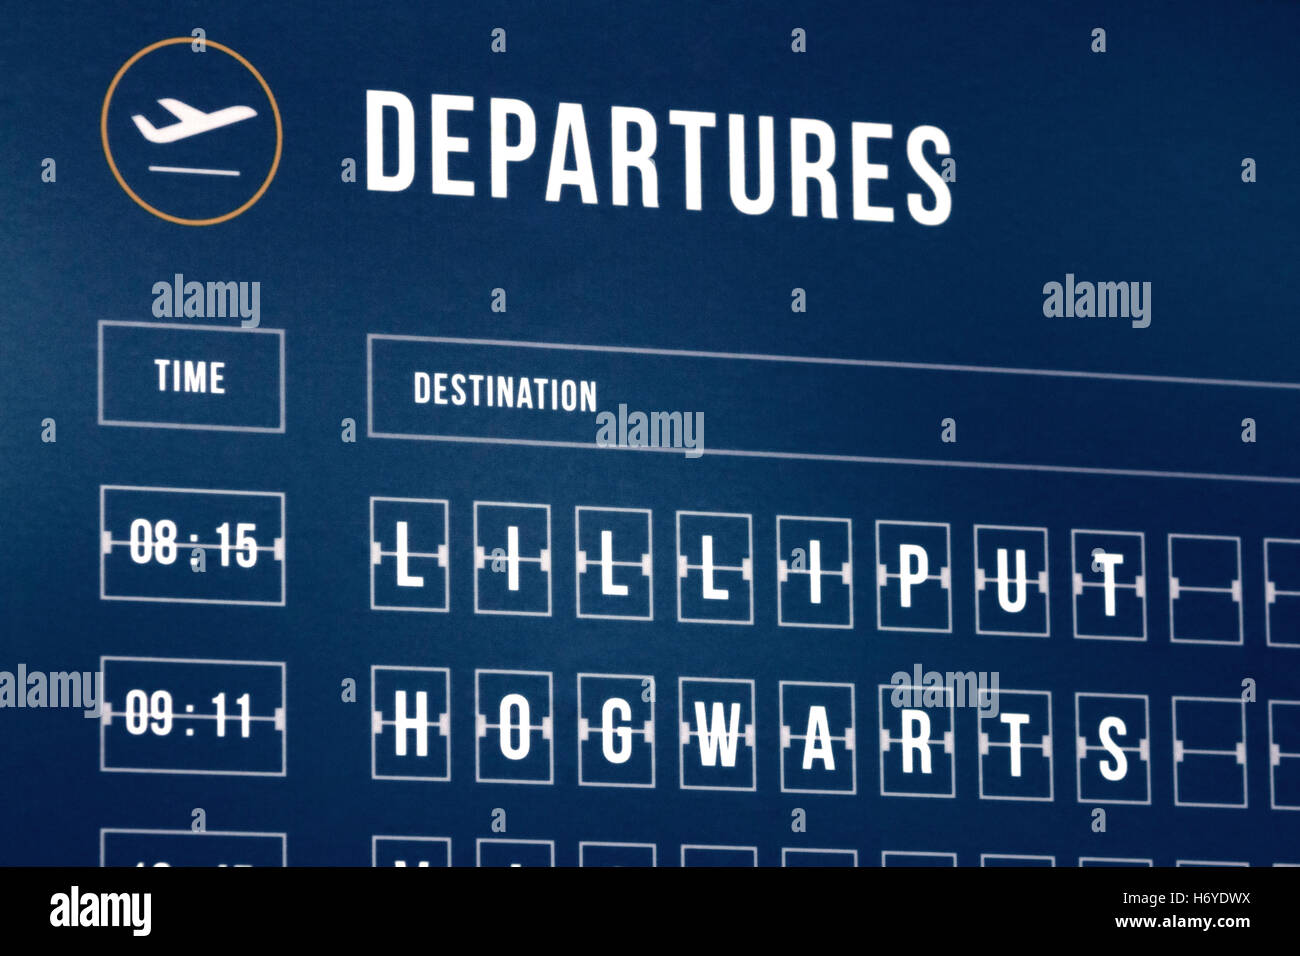 An airport departures timetable with fictional places (Lilliput and Hogwarts) Stock Photo